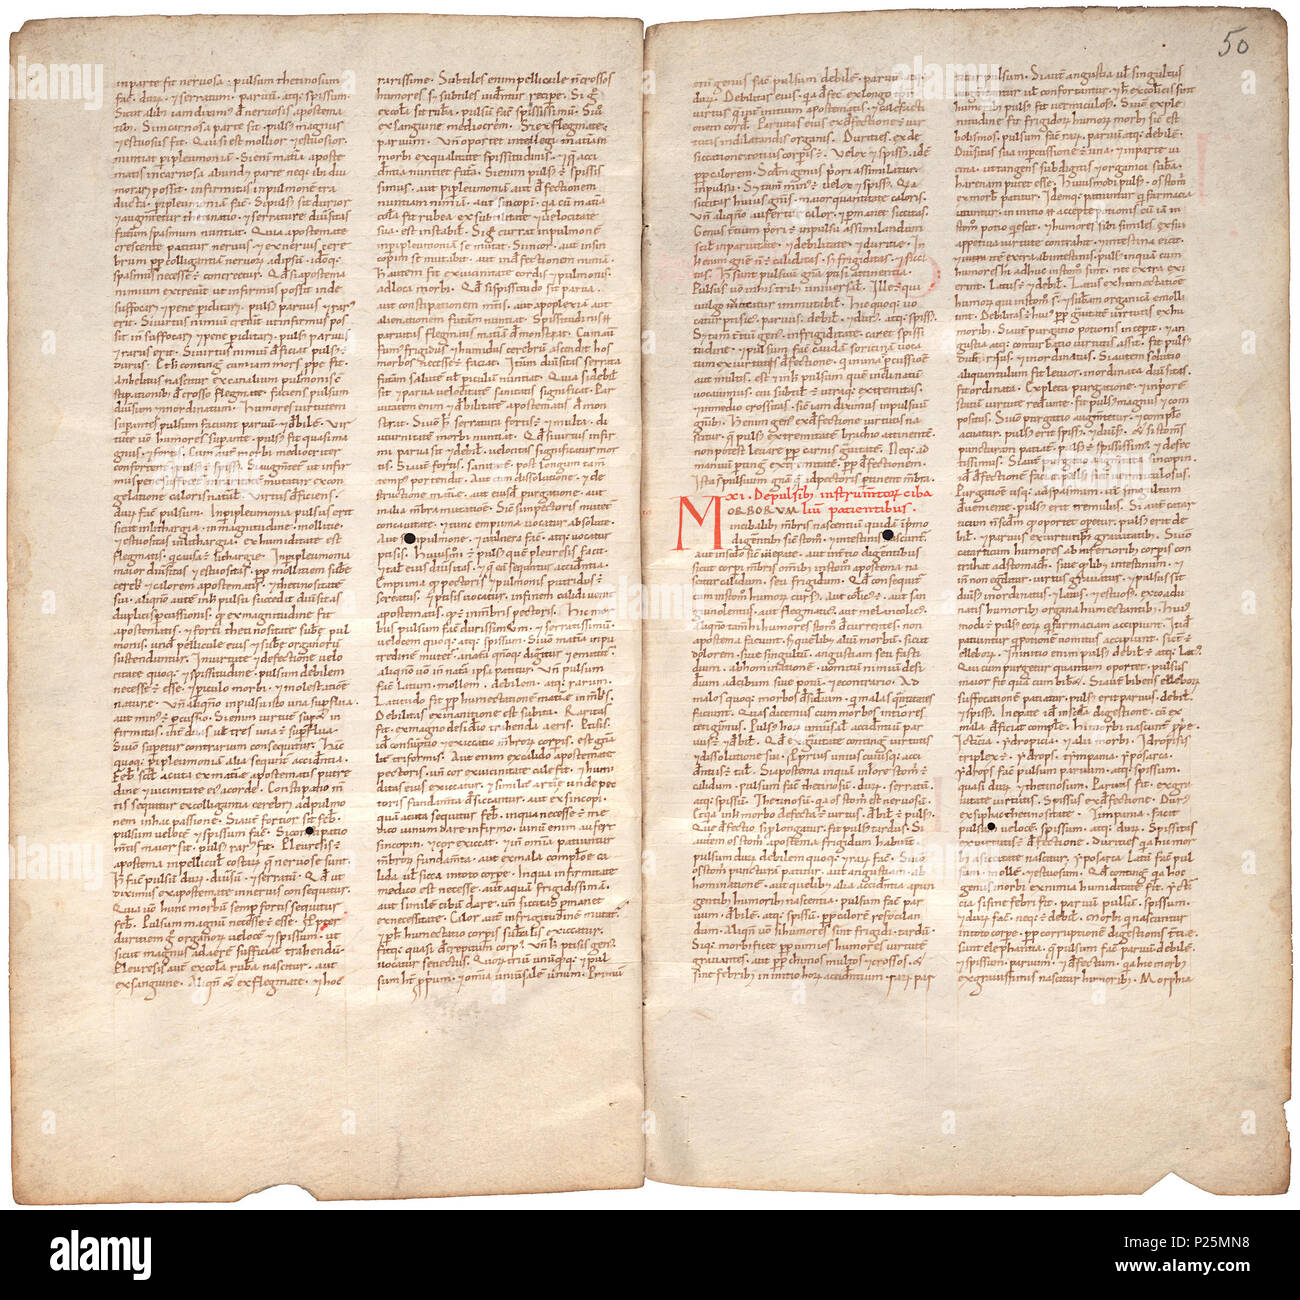 . Pantegni pars prima theorica (lib. I-X) - folios 049v (left) and 050r (right)  .  Lefthand side folio 049v; righthand side folio 050r from an 11th century copy of the Liber pantegni. This is the earliest known copy (prior to 1086) of the Liber pantegni, made at Monte Cassino under the supervision of Constantine the African. It is dedicated to Abbot Desiderius of Monte Cassino (1027-1087), before he became Pope Victor III. Read backgroud information in Dutch and in English. . Constantine the African (ca. 1010-1098/9) 175 Liber pantegni - KB 73 J 6 - folios 049v (left) and 050r (right) Stock Photo